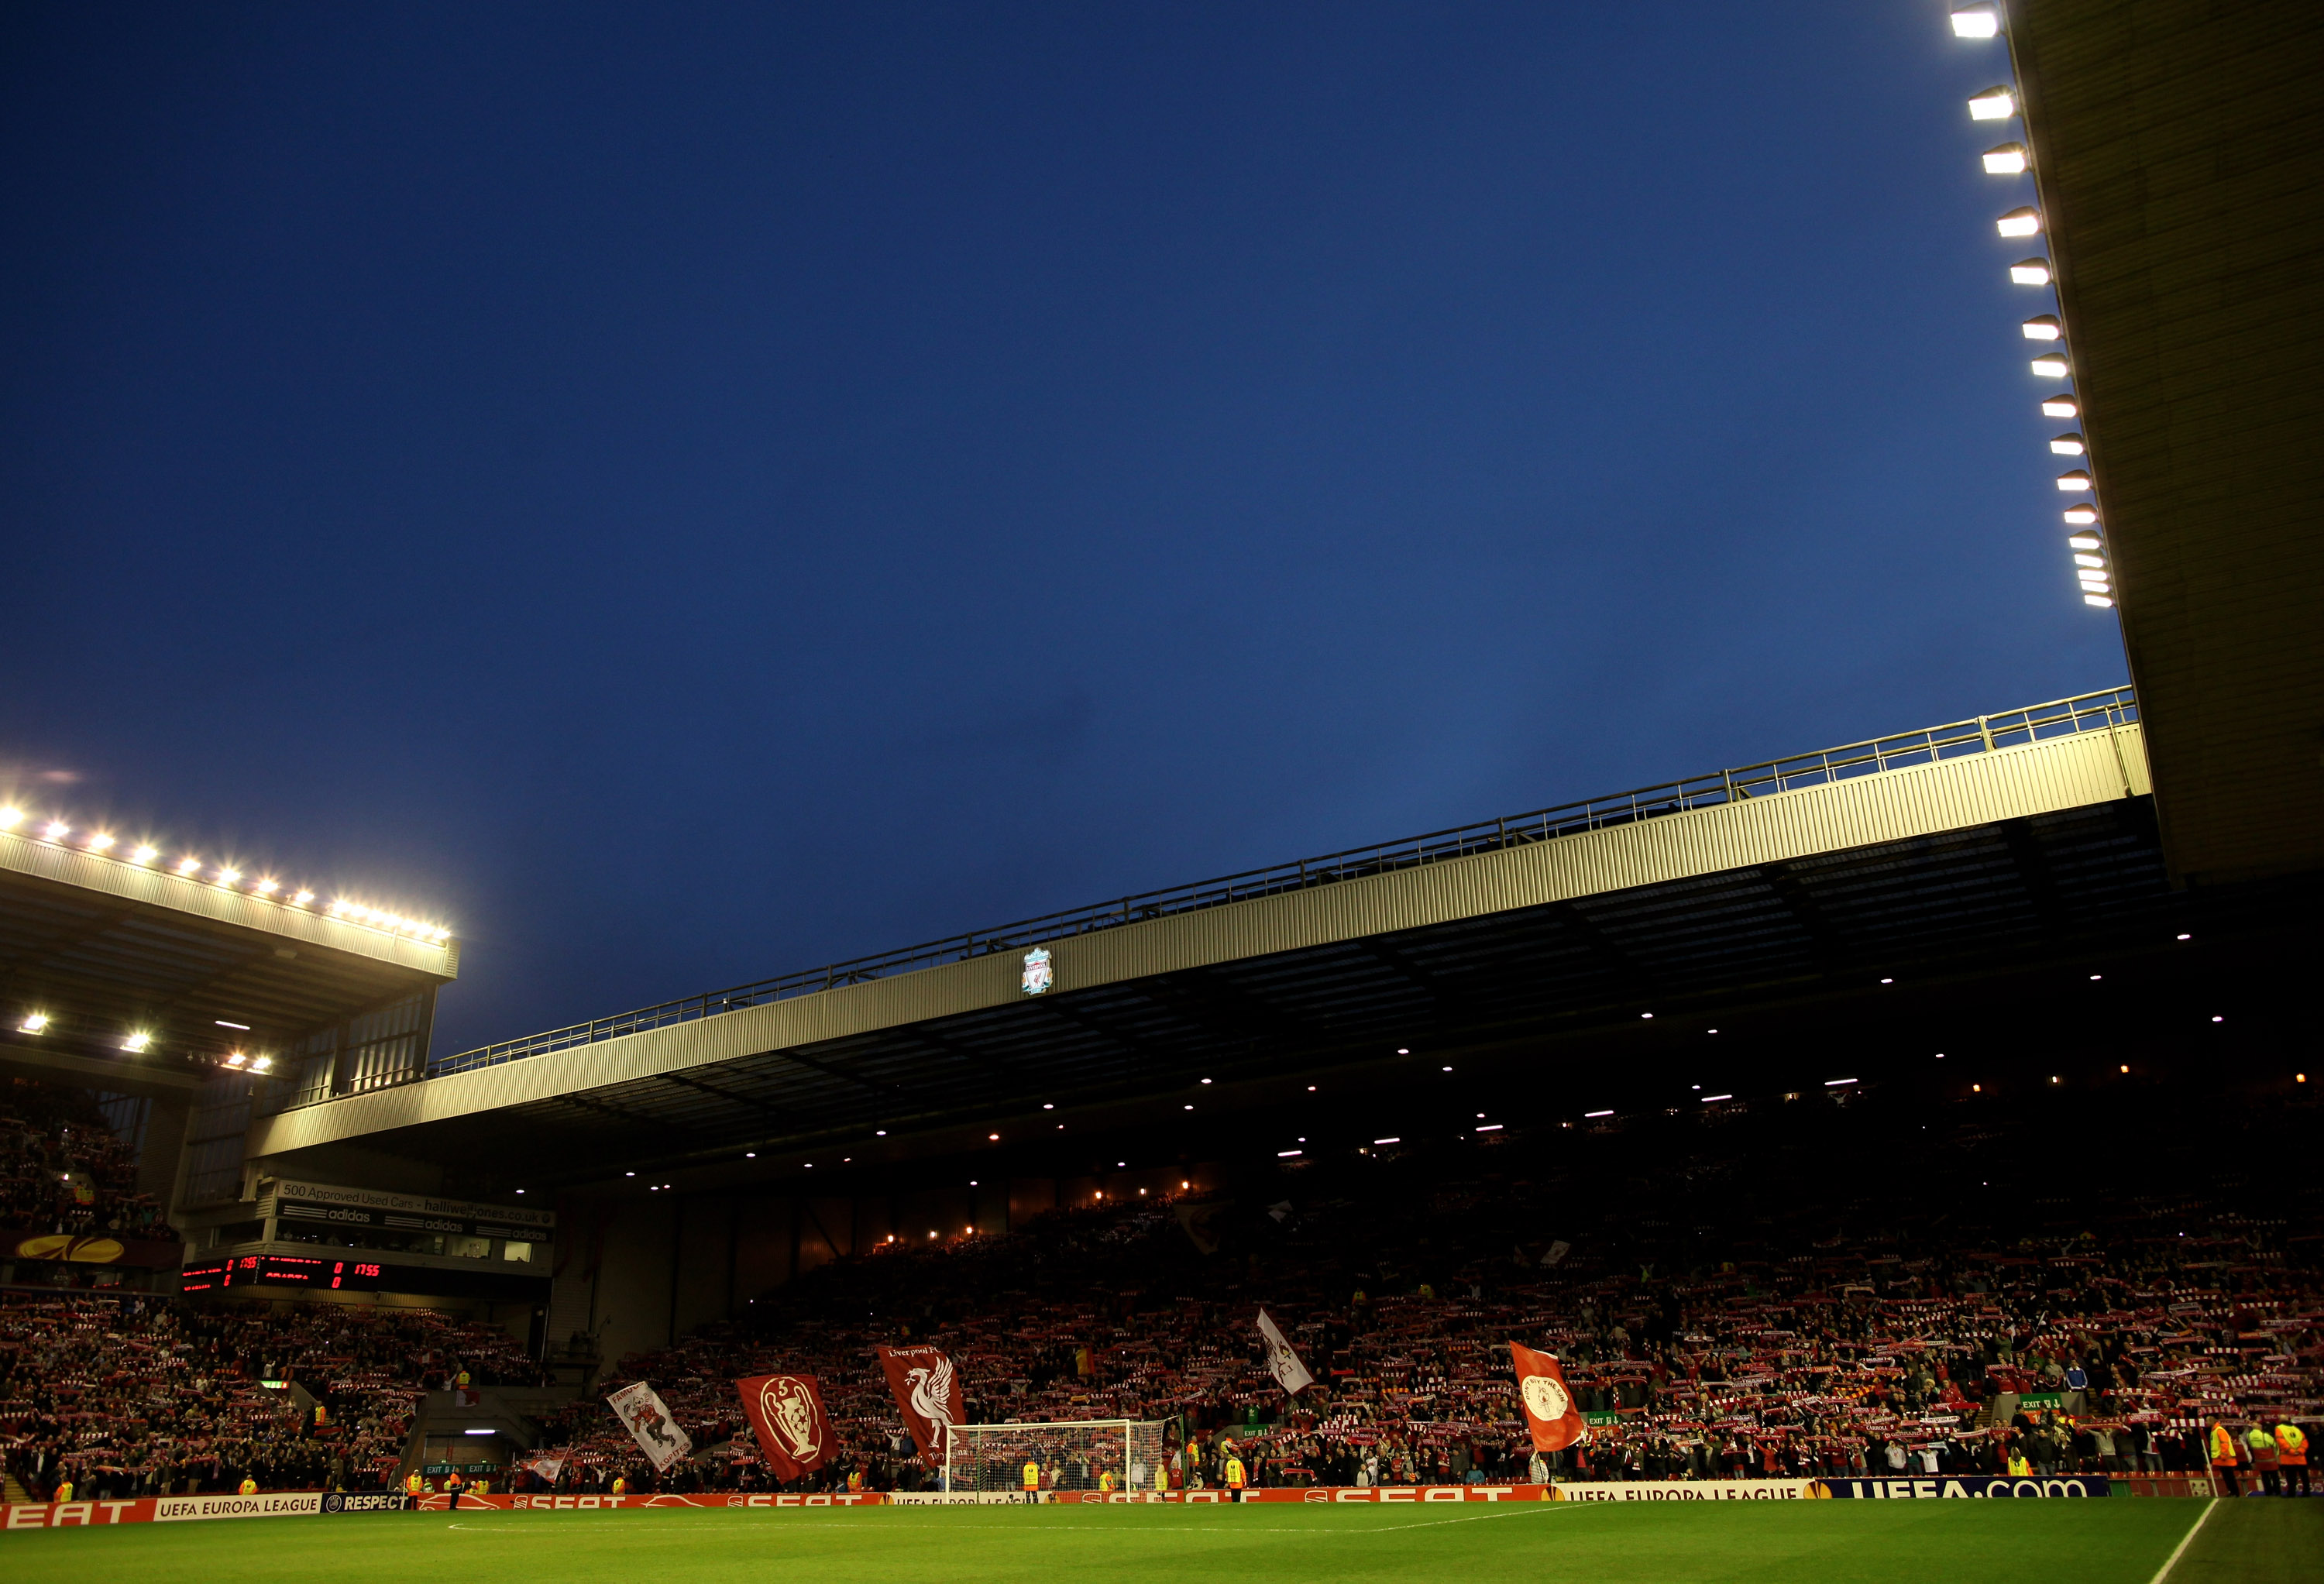 LIVERPOOL, ENGLAND - FEBRUARY 24:  General View of the kop end prior to the UEFA Europa League Round of 32 2nd leg match beteween Liverpool and Sparta Prague at Anfield on February 24, 2011 in Liverpool, England.  (Photo by Richard Heathcote/Getty Images)